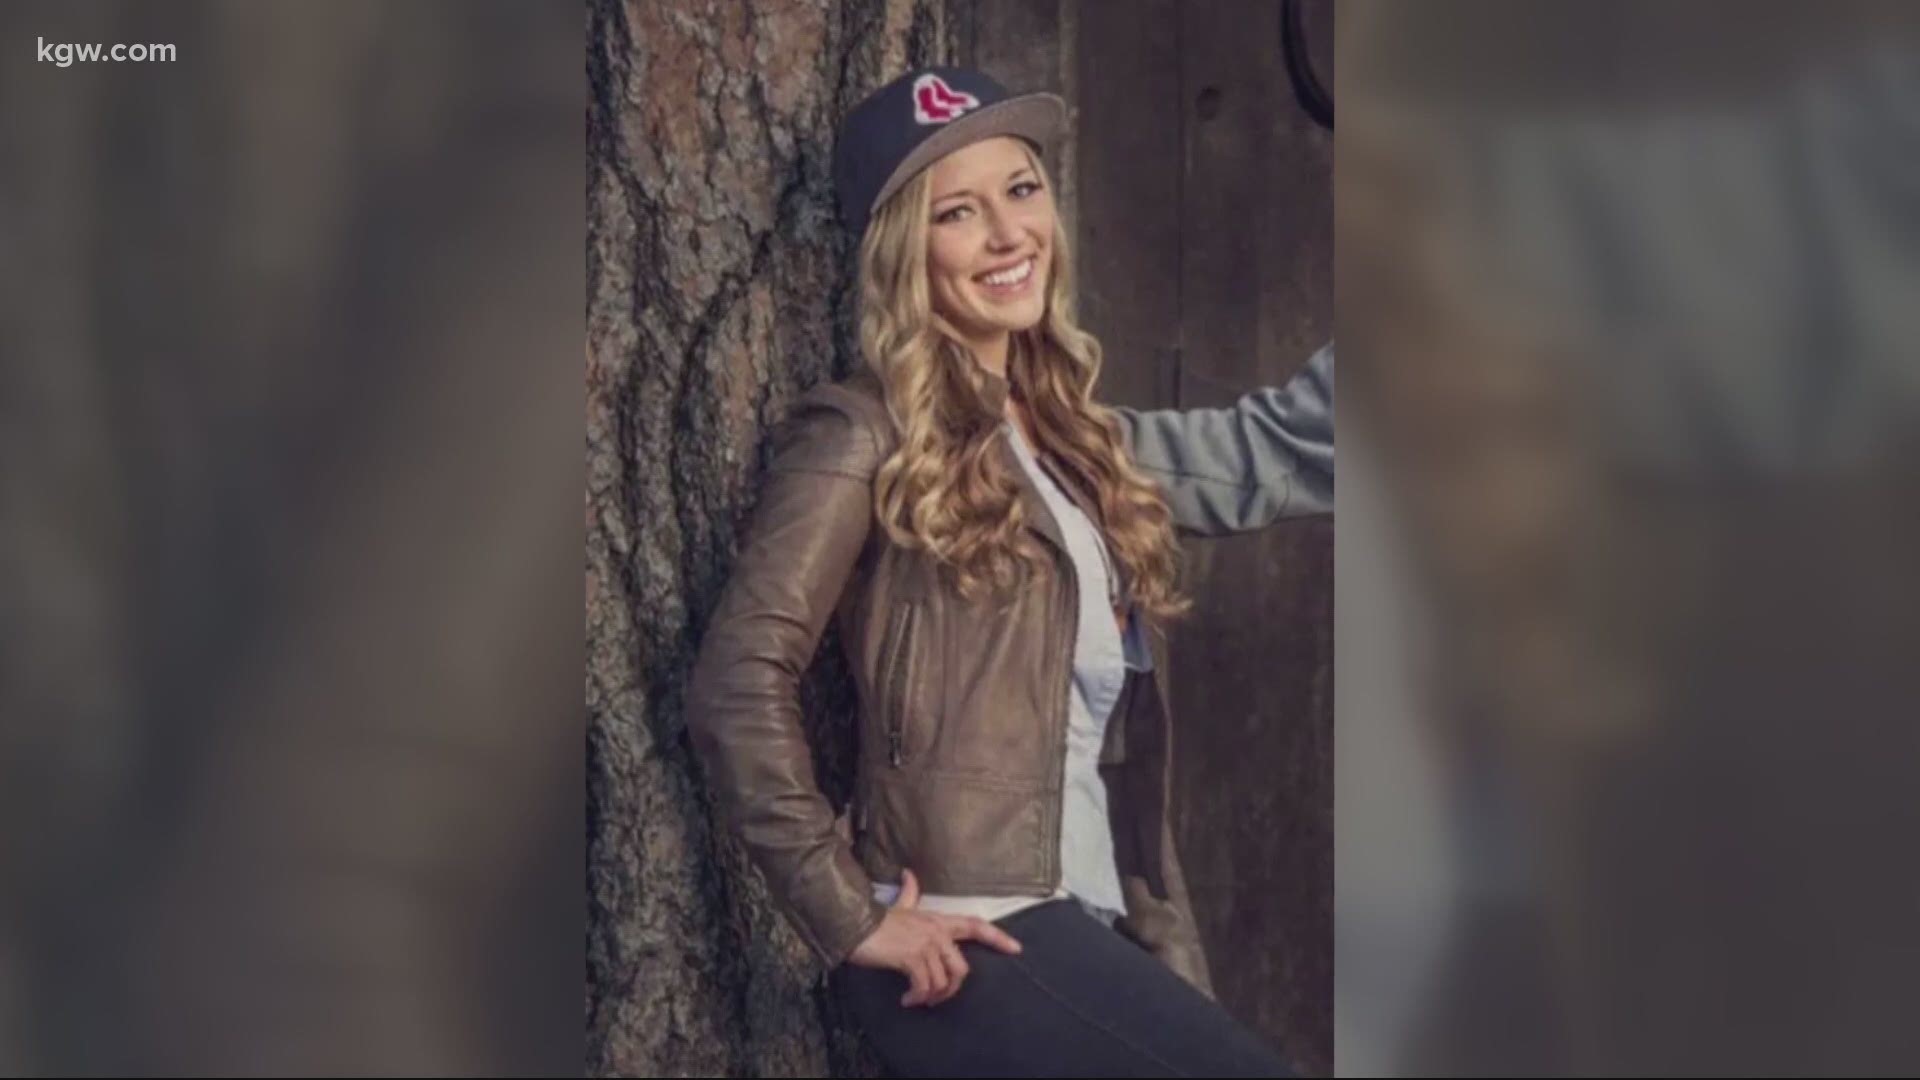 Just before the 4-year anniversary of the murder of Kaylee Sawyer, her family settled with Central Oregon Community College for $2 million.